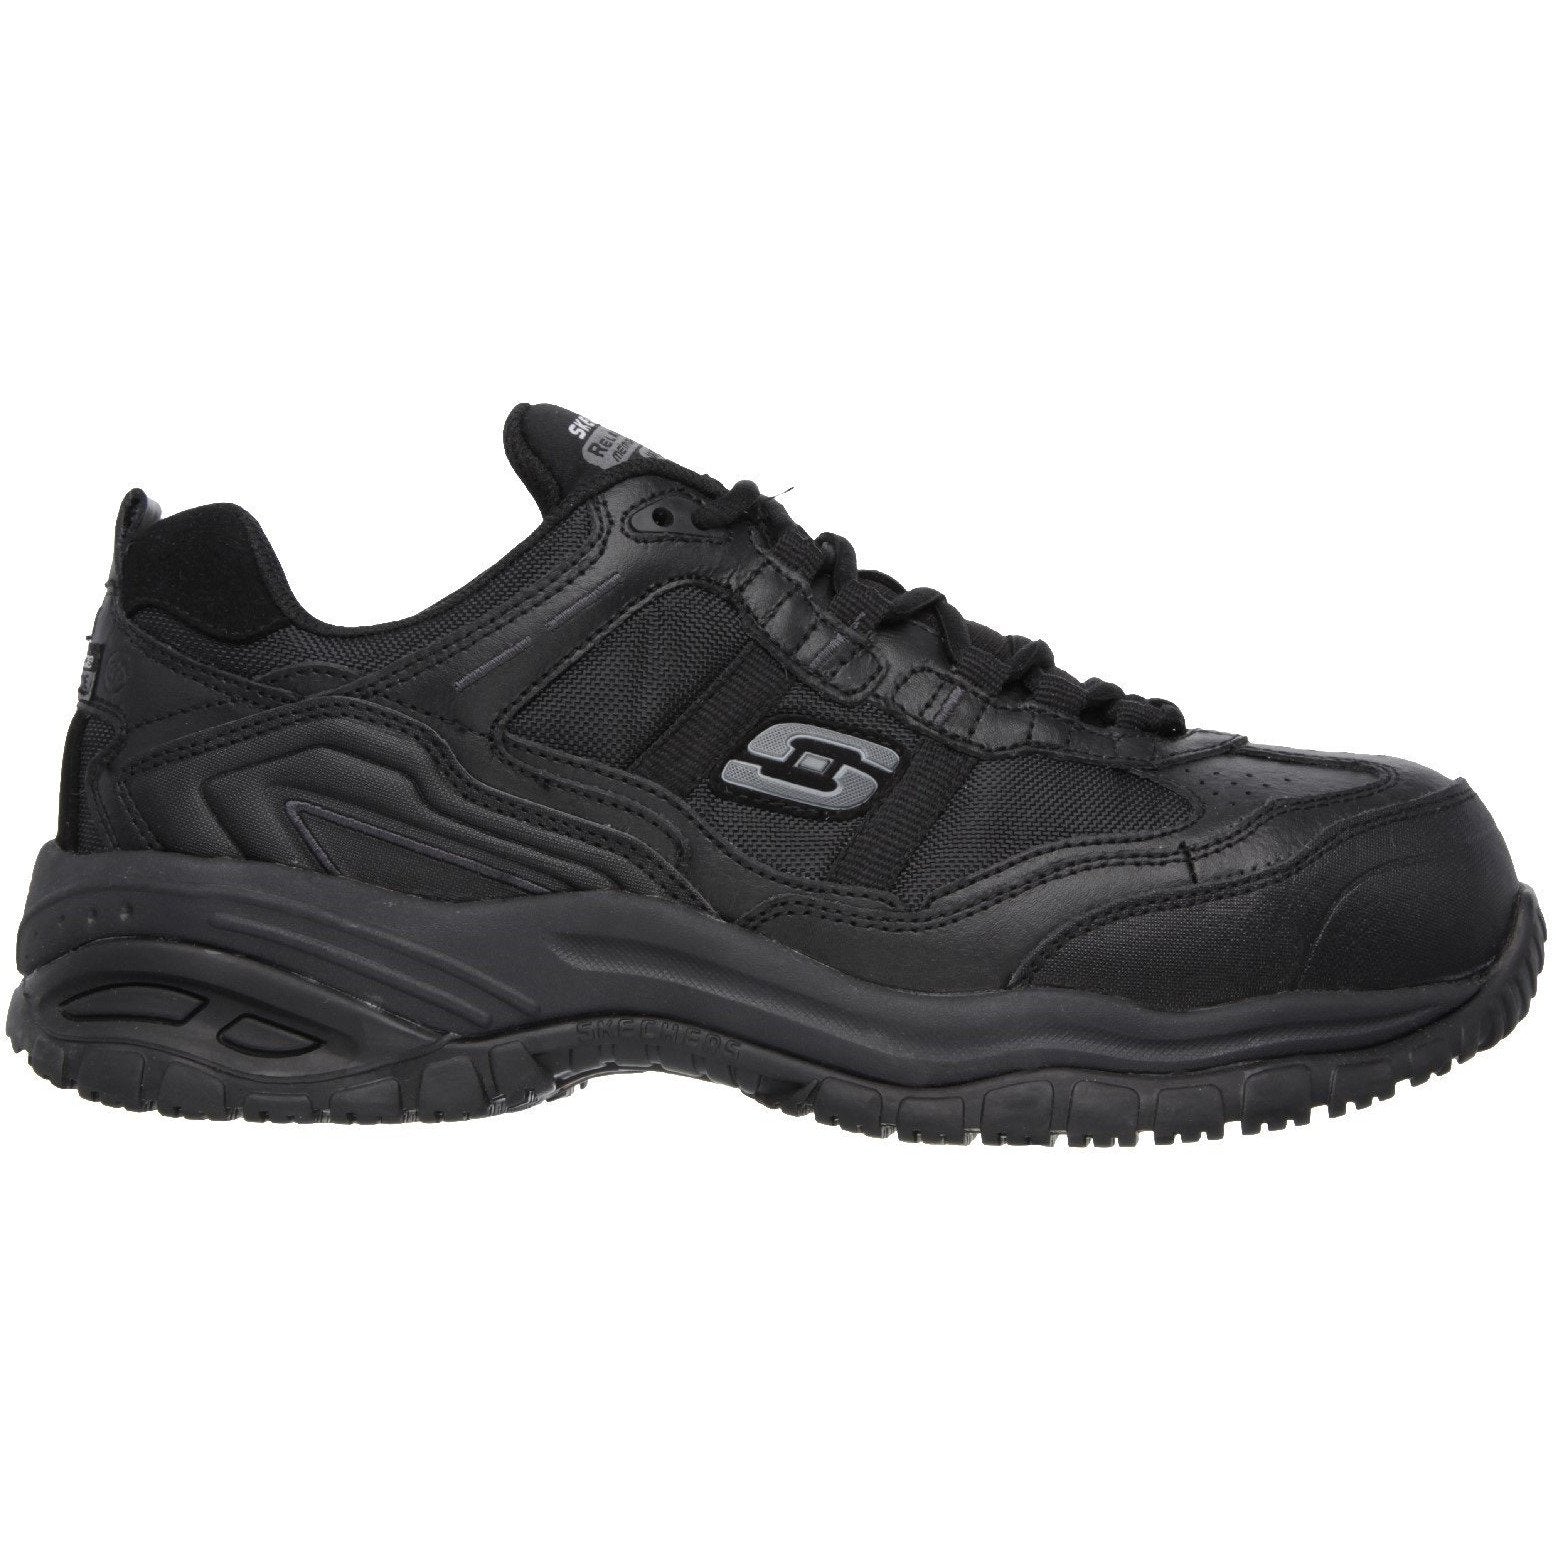 Skechers Work Grinnell Safety Trainer with Composite Toe Cap – WORK+SAFETY